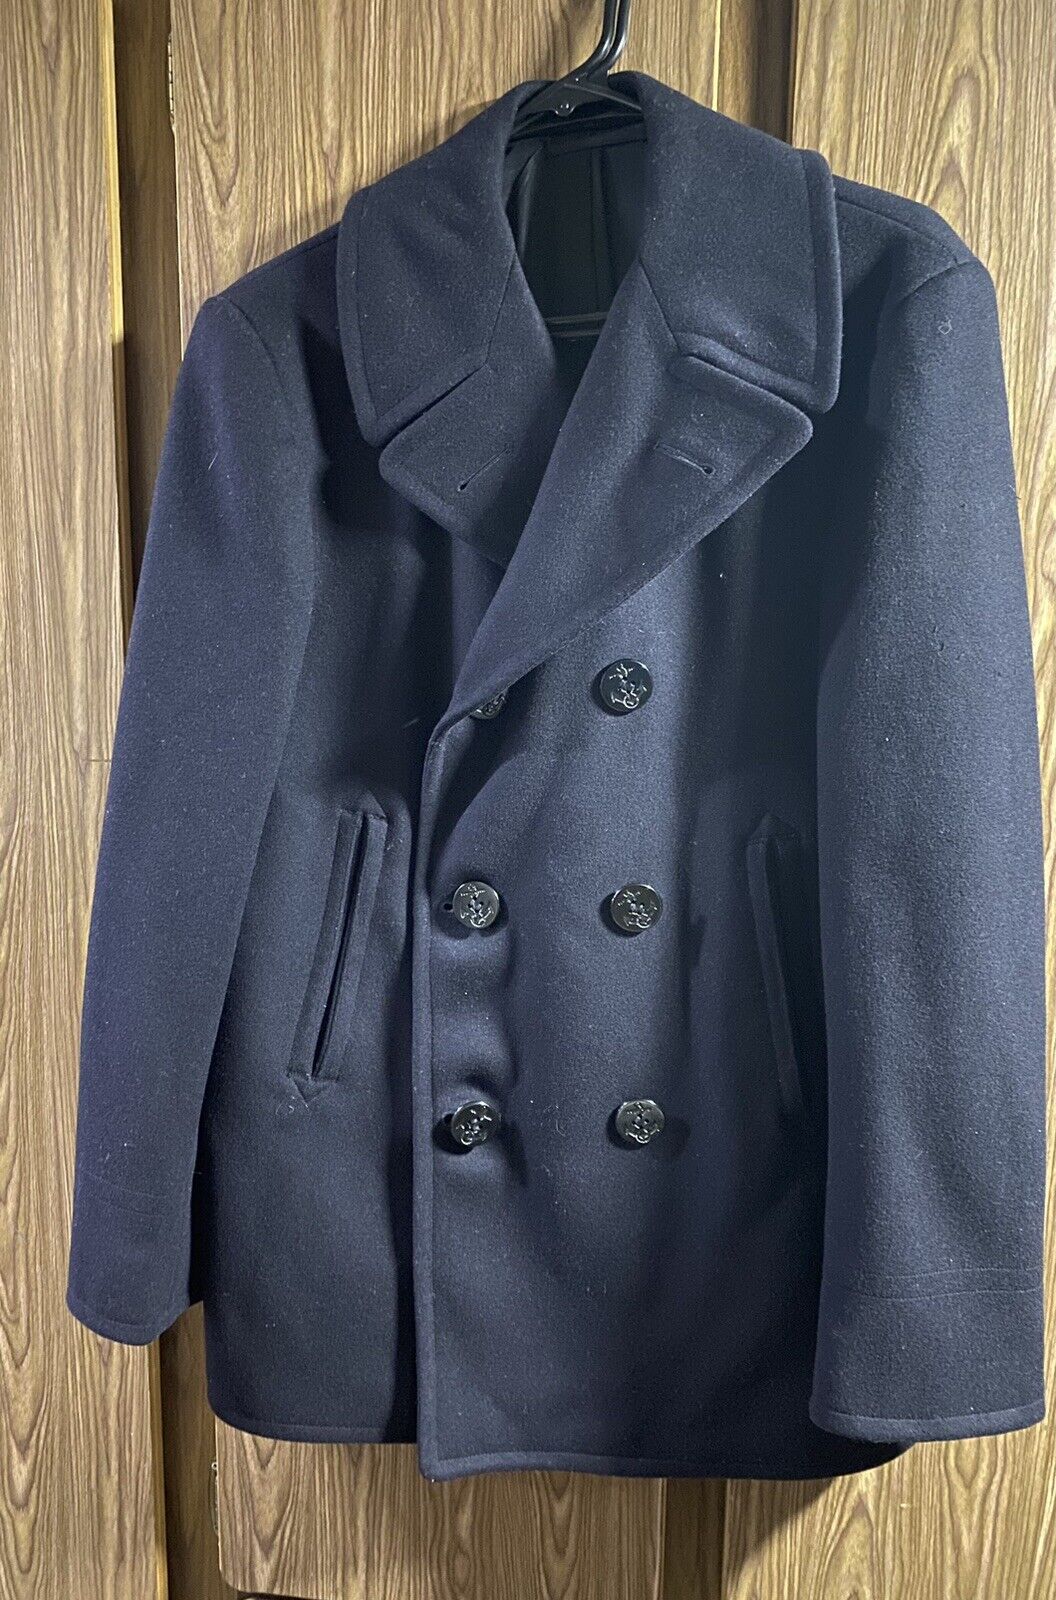 Vintage 40s US Navy Pea Coat Military Issue Heavy Wool Cold Weather Black WWII